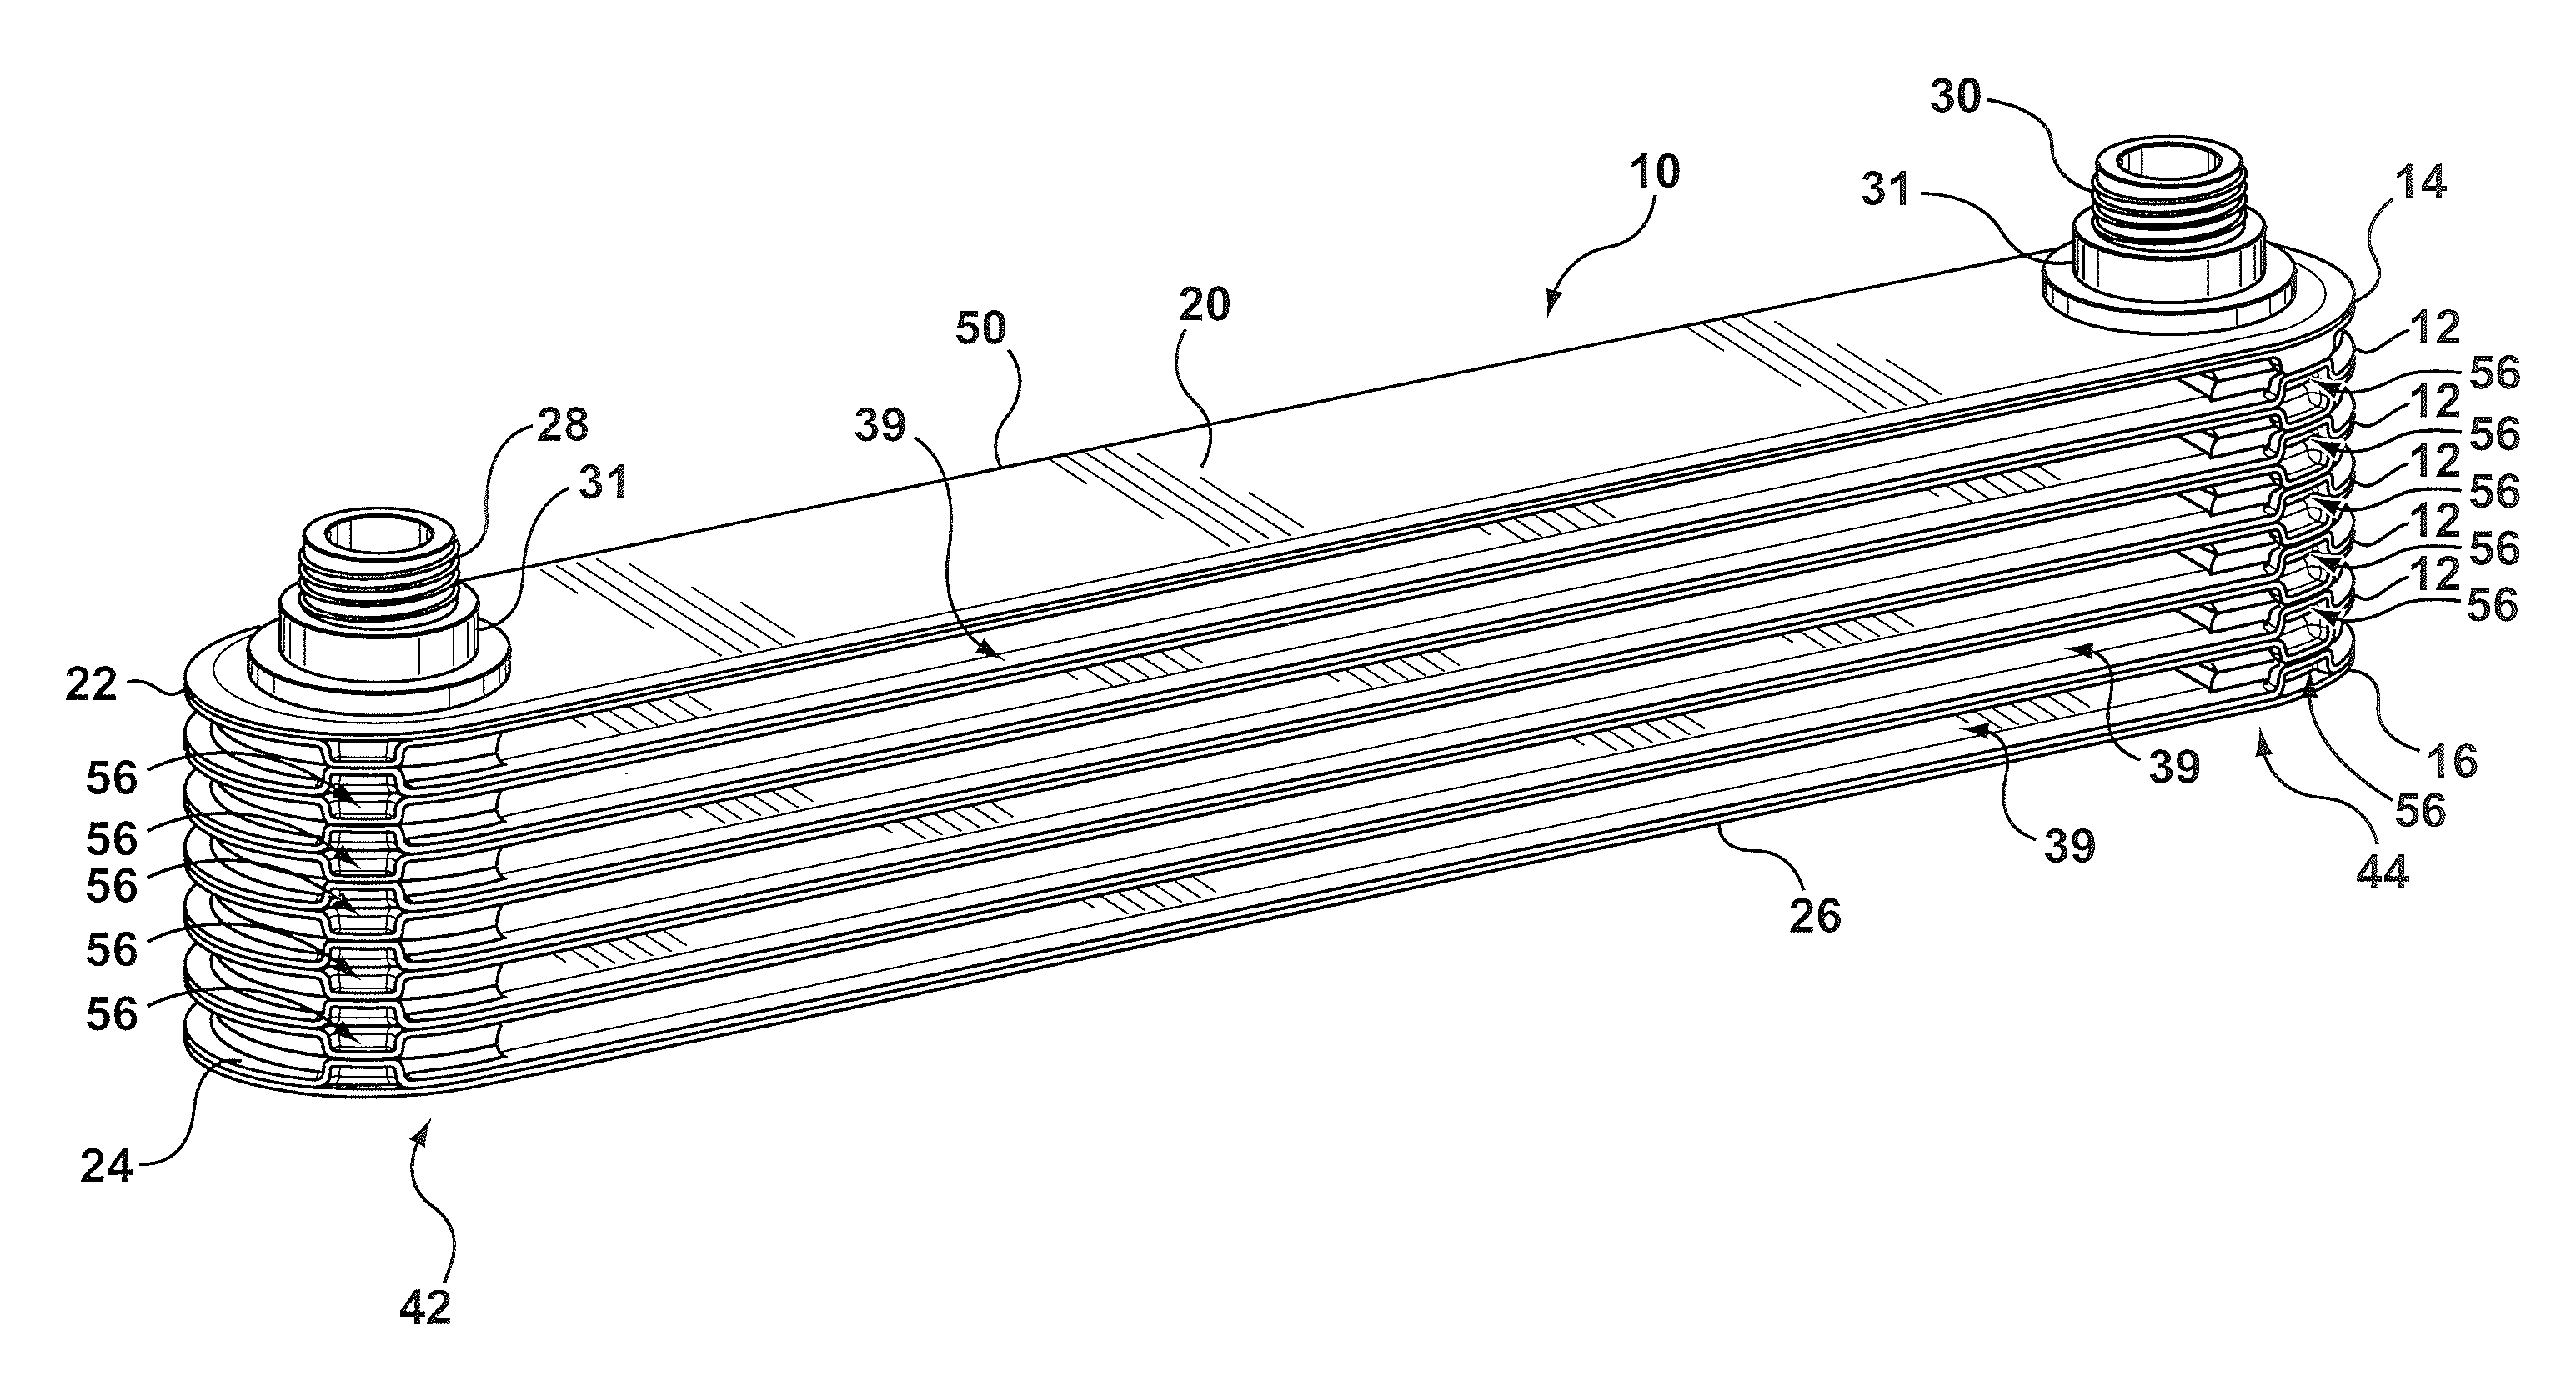 Heat exchanger with manifold strengthening protrusion